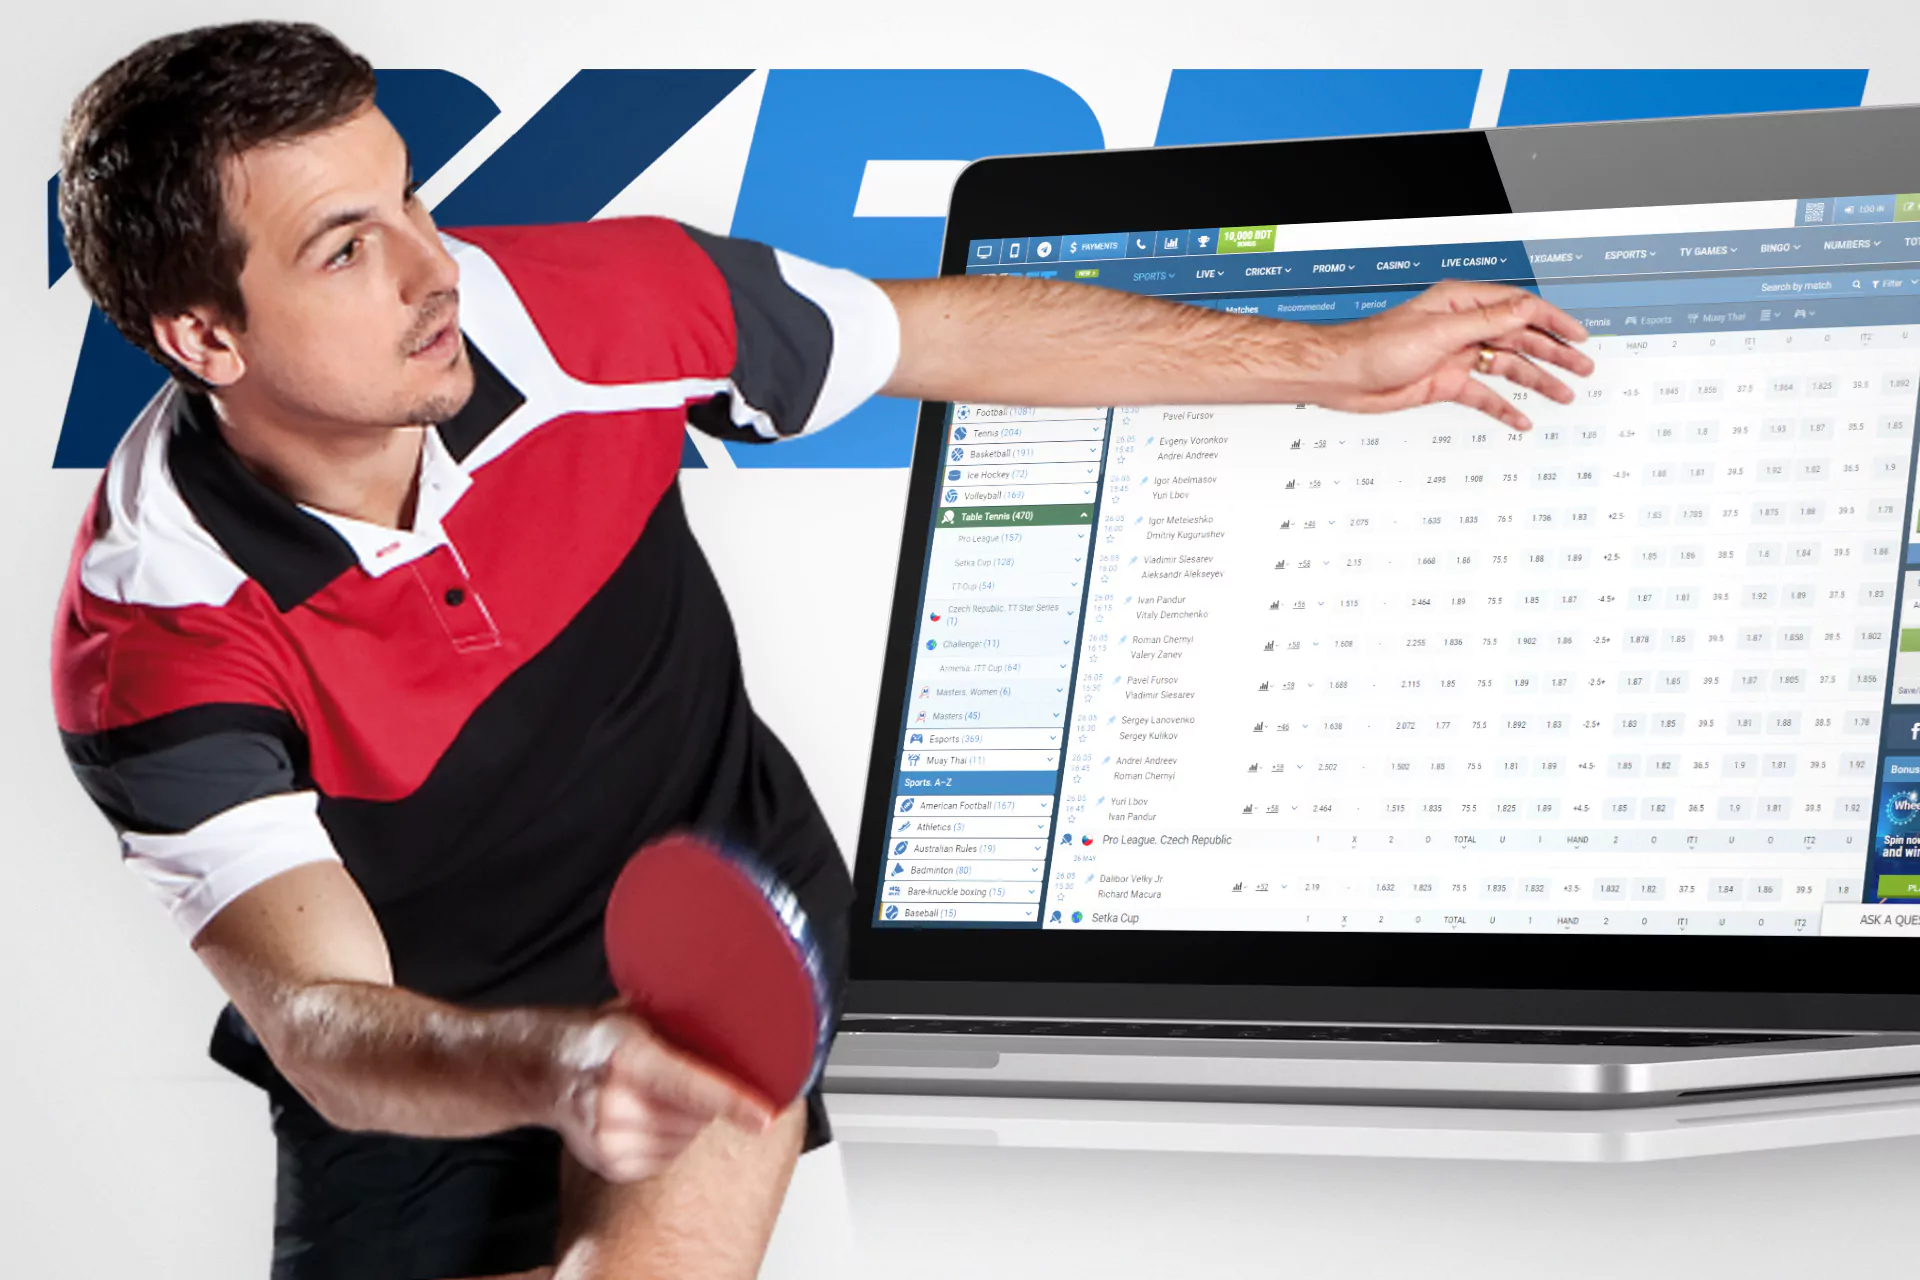 Sign up at 1xBet and place bets on table tennis events.